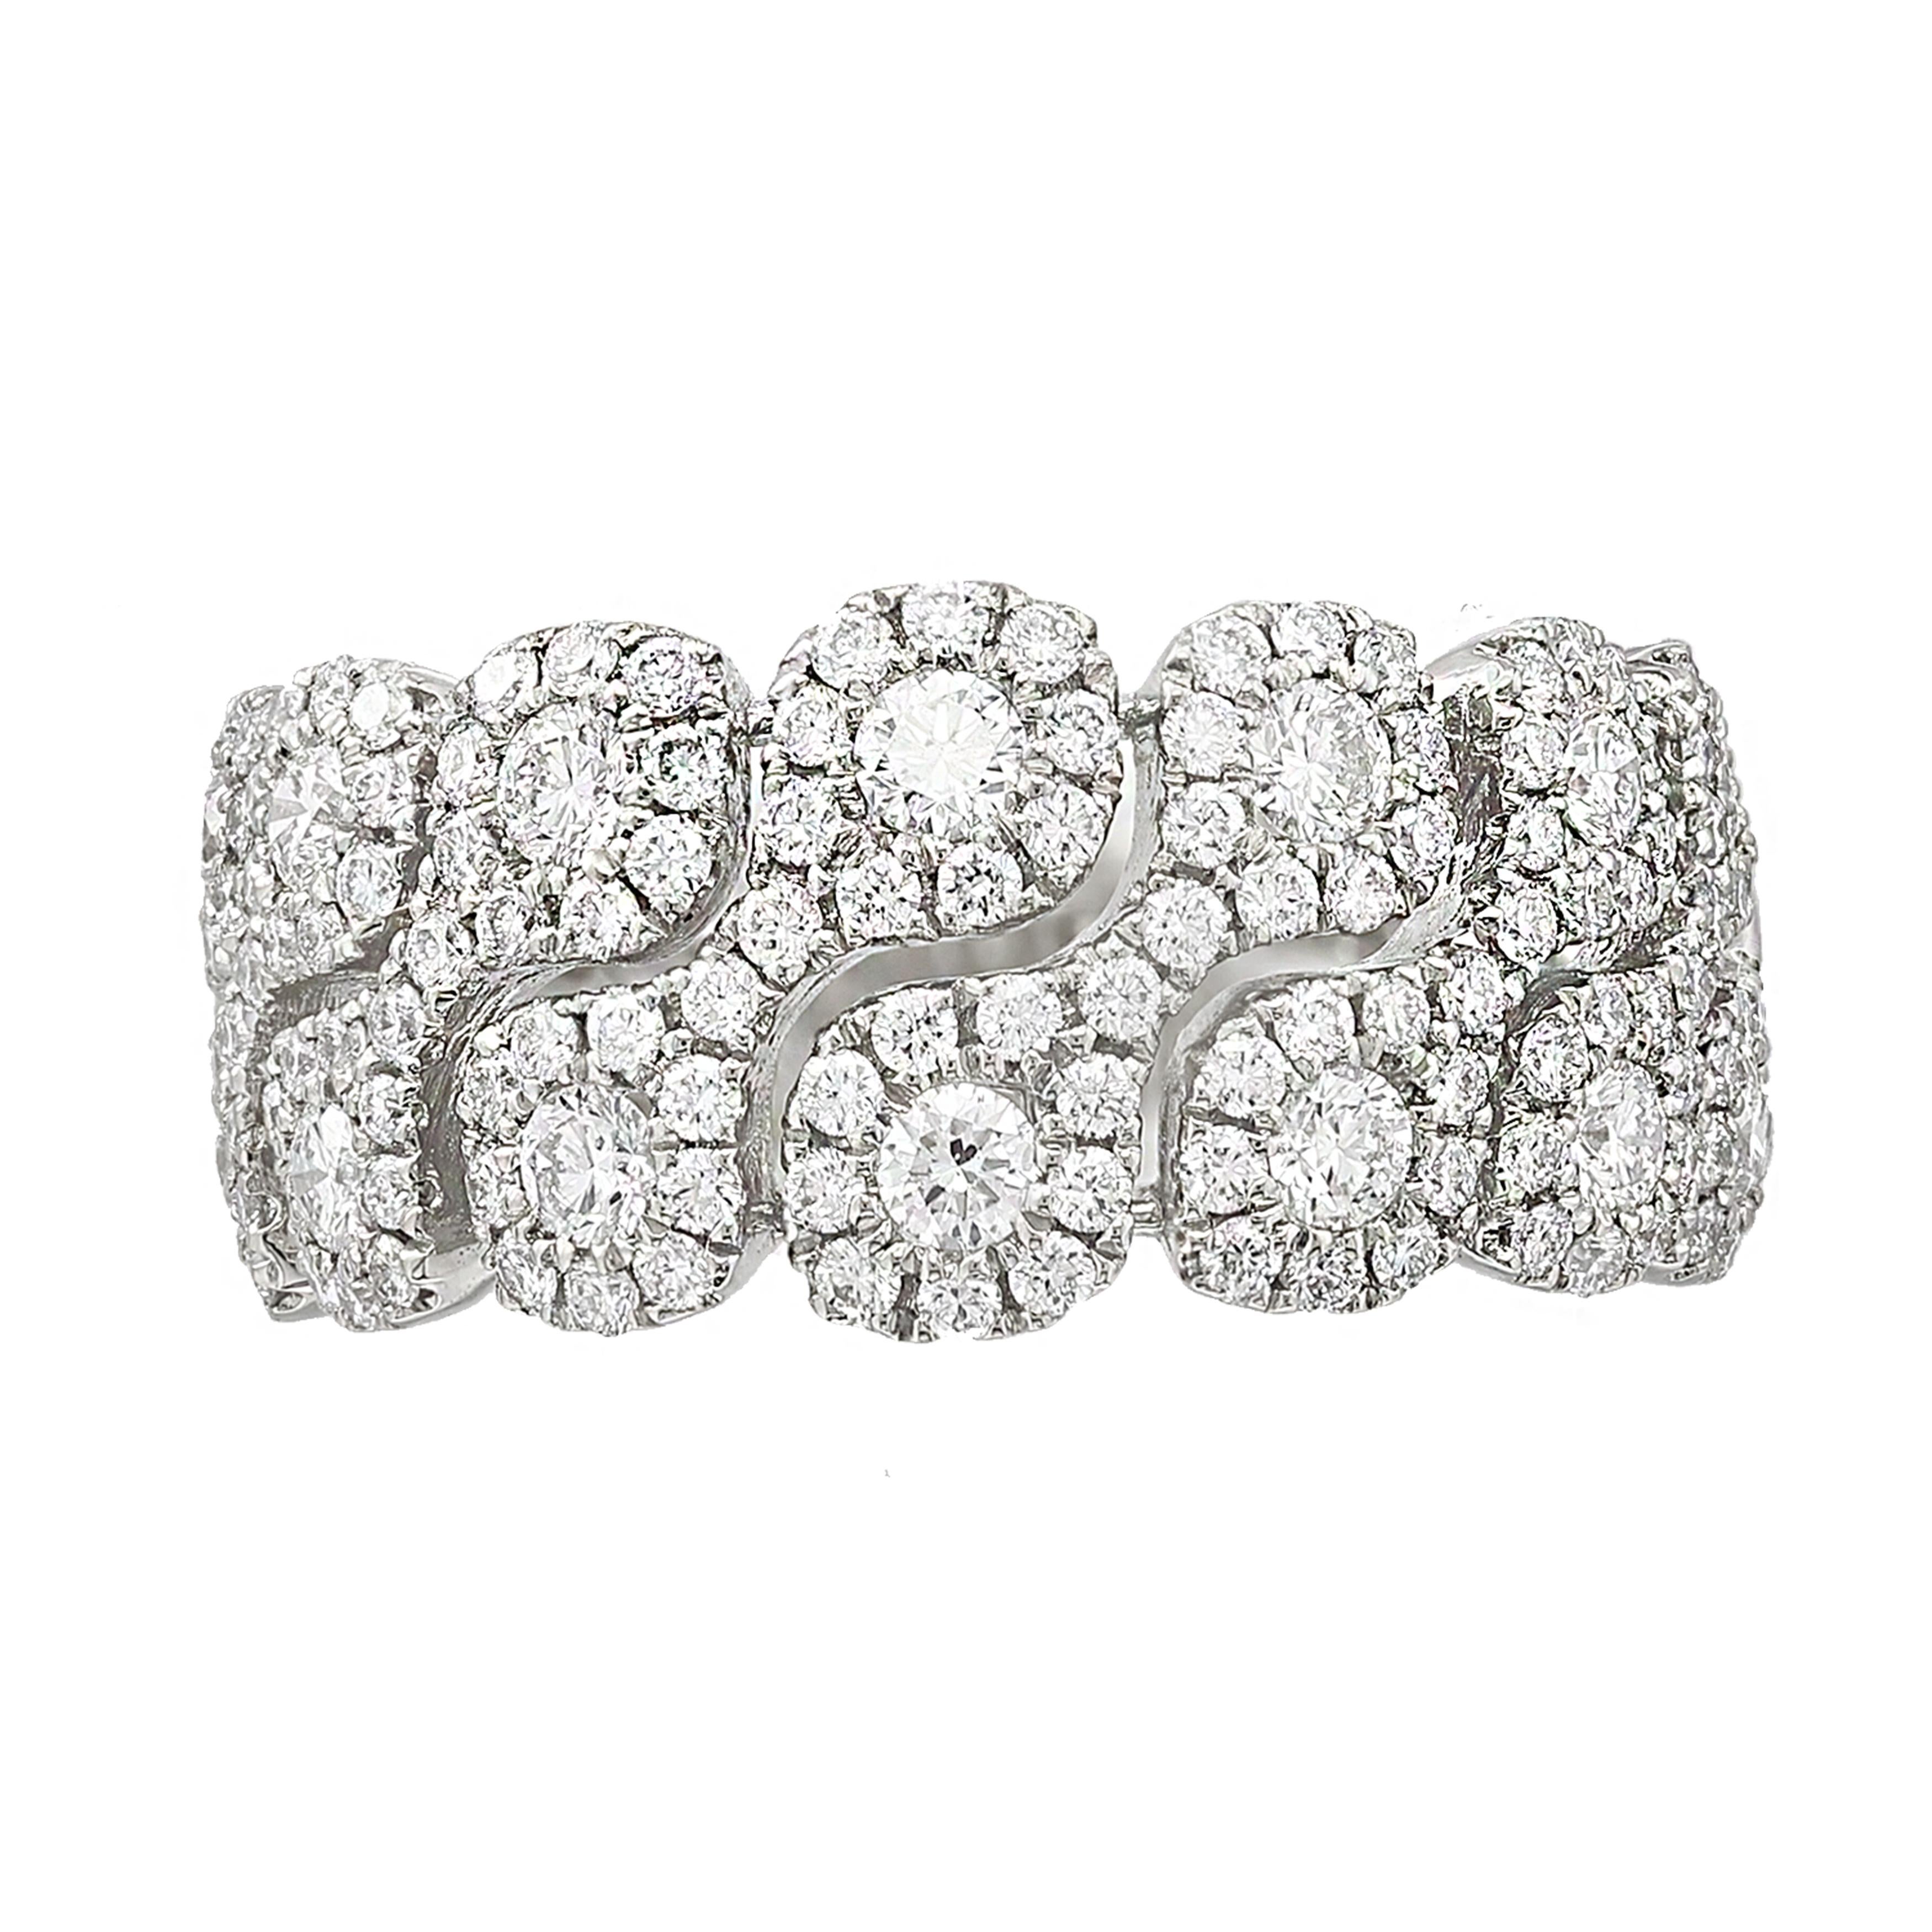 A magnificent and unique piece of jewelry showcasing fancy round diamonds set in an open-work, floating diamond design made in 18K White gold. 154 Diamonds weigh 1.24 carats total. 

Size 6.5 US (Sizable). 
All diamonds are GH color SI1